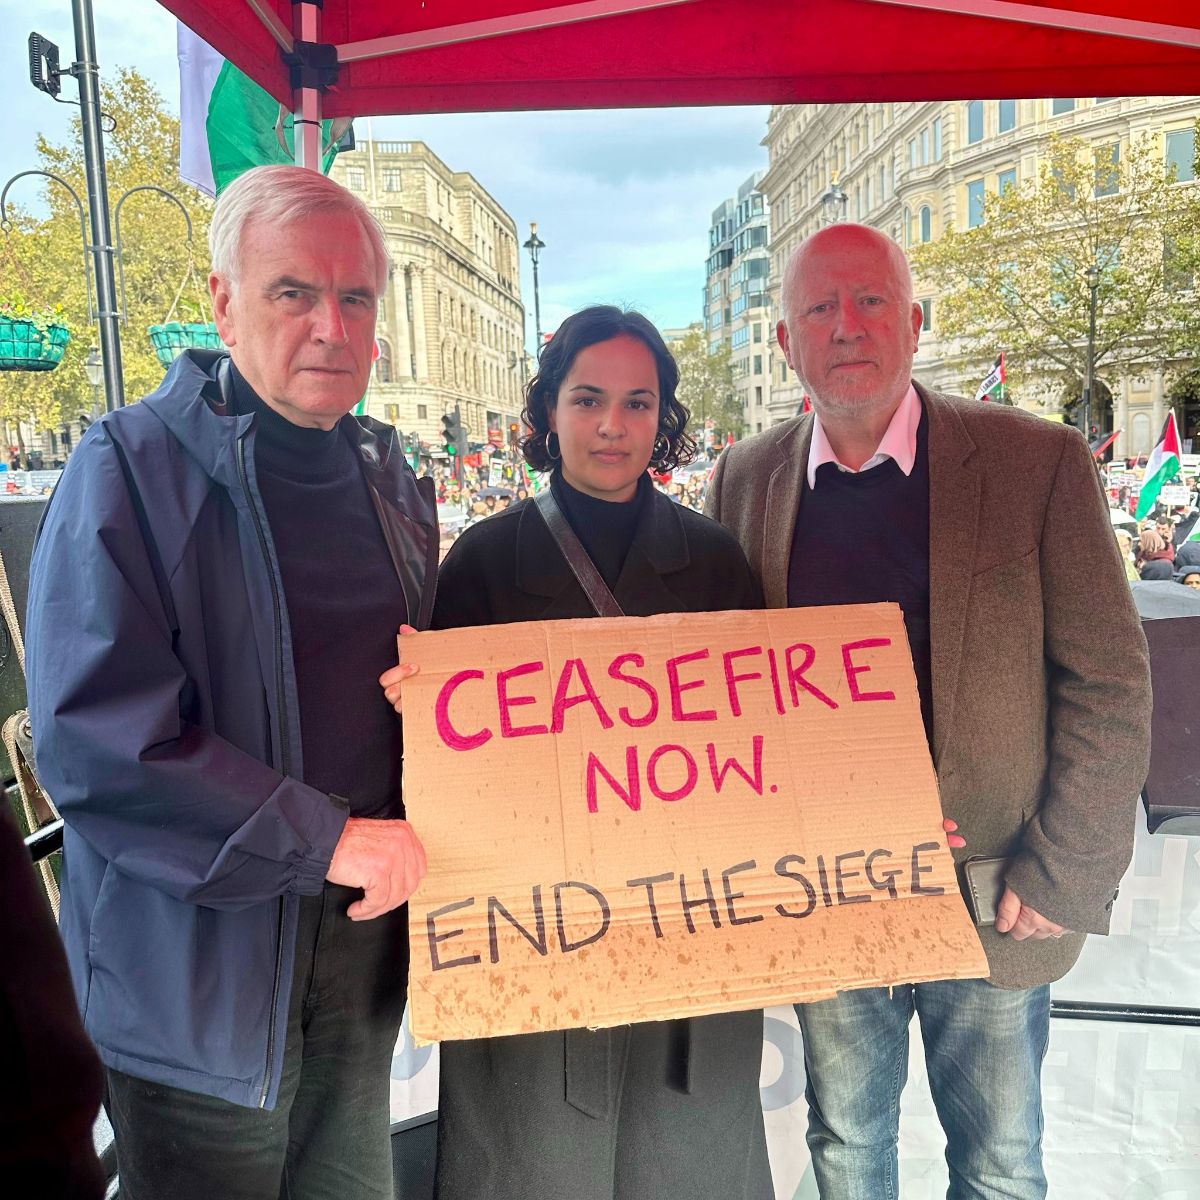 Nadia with John McDonnell MP and Andy McDonald MP at the national Palestine demonstration, holding a sign that read "Ceasefire now. End the siege."